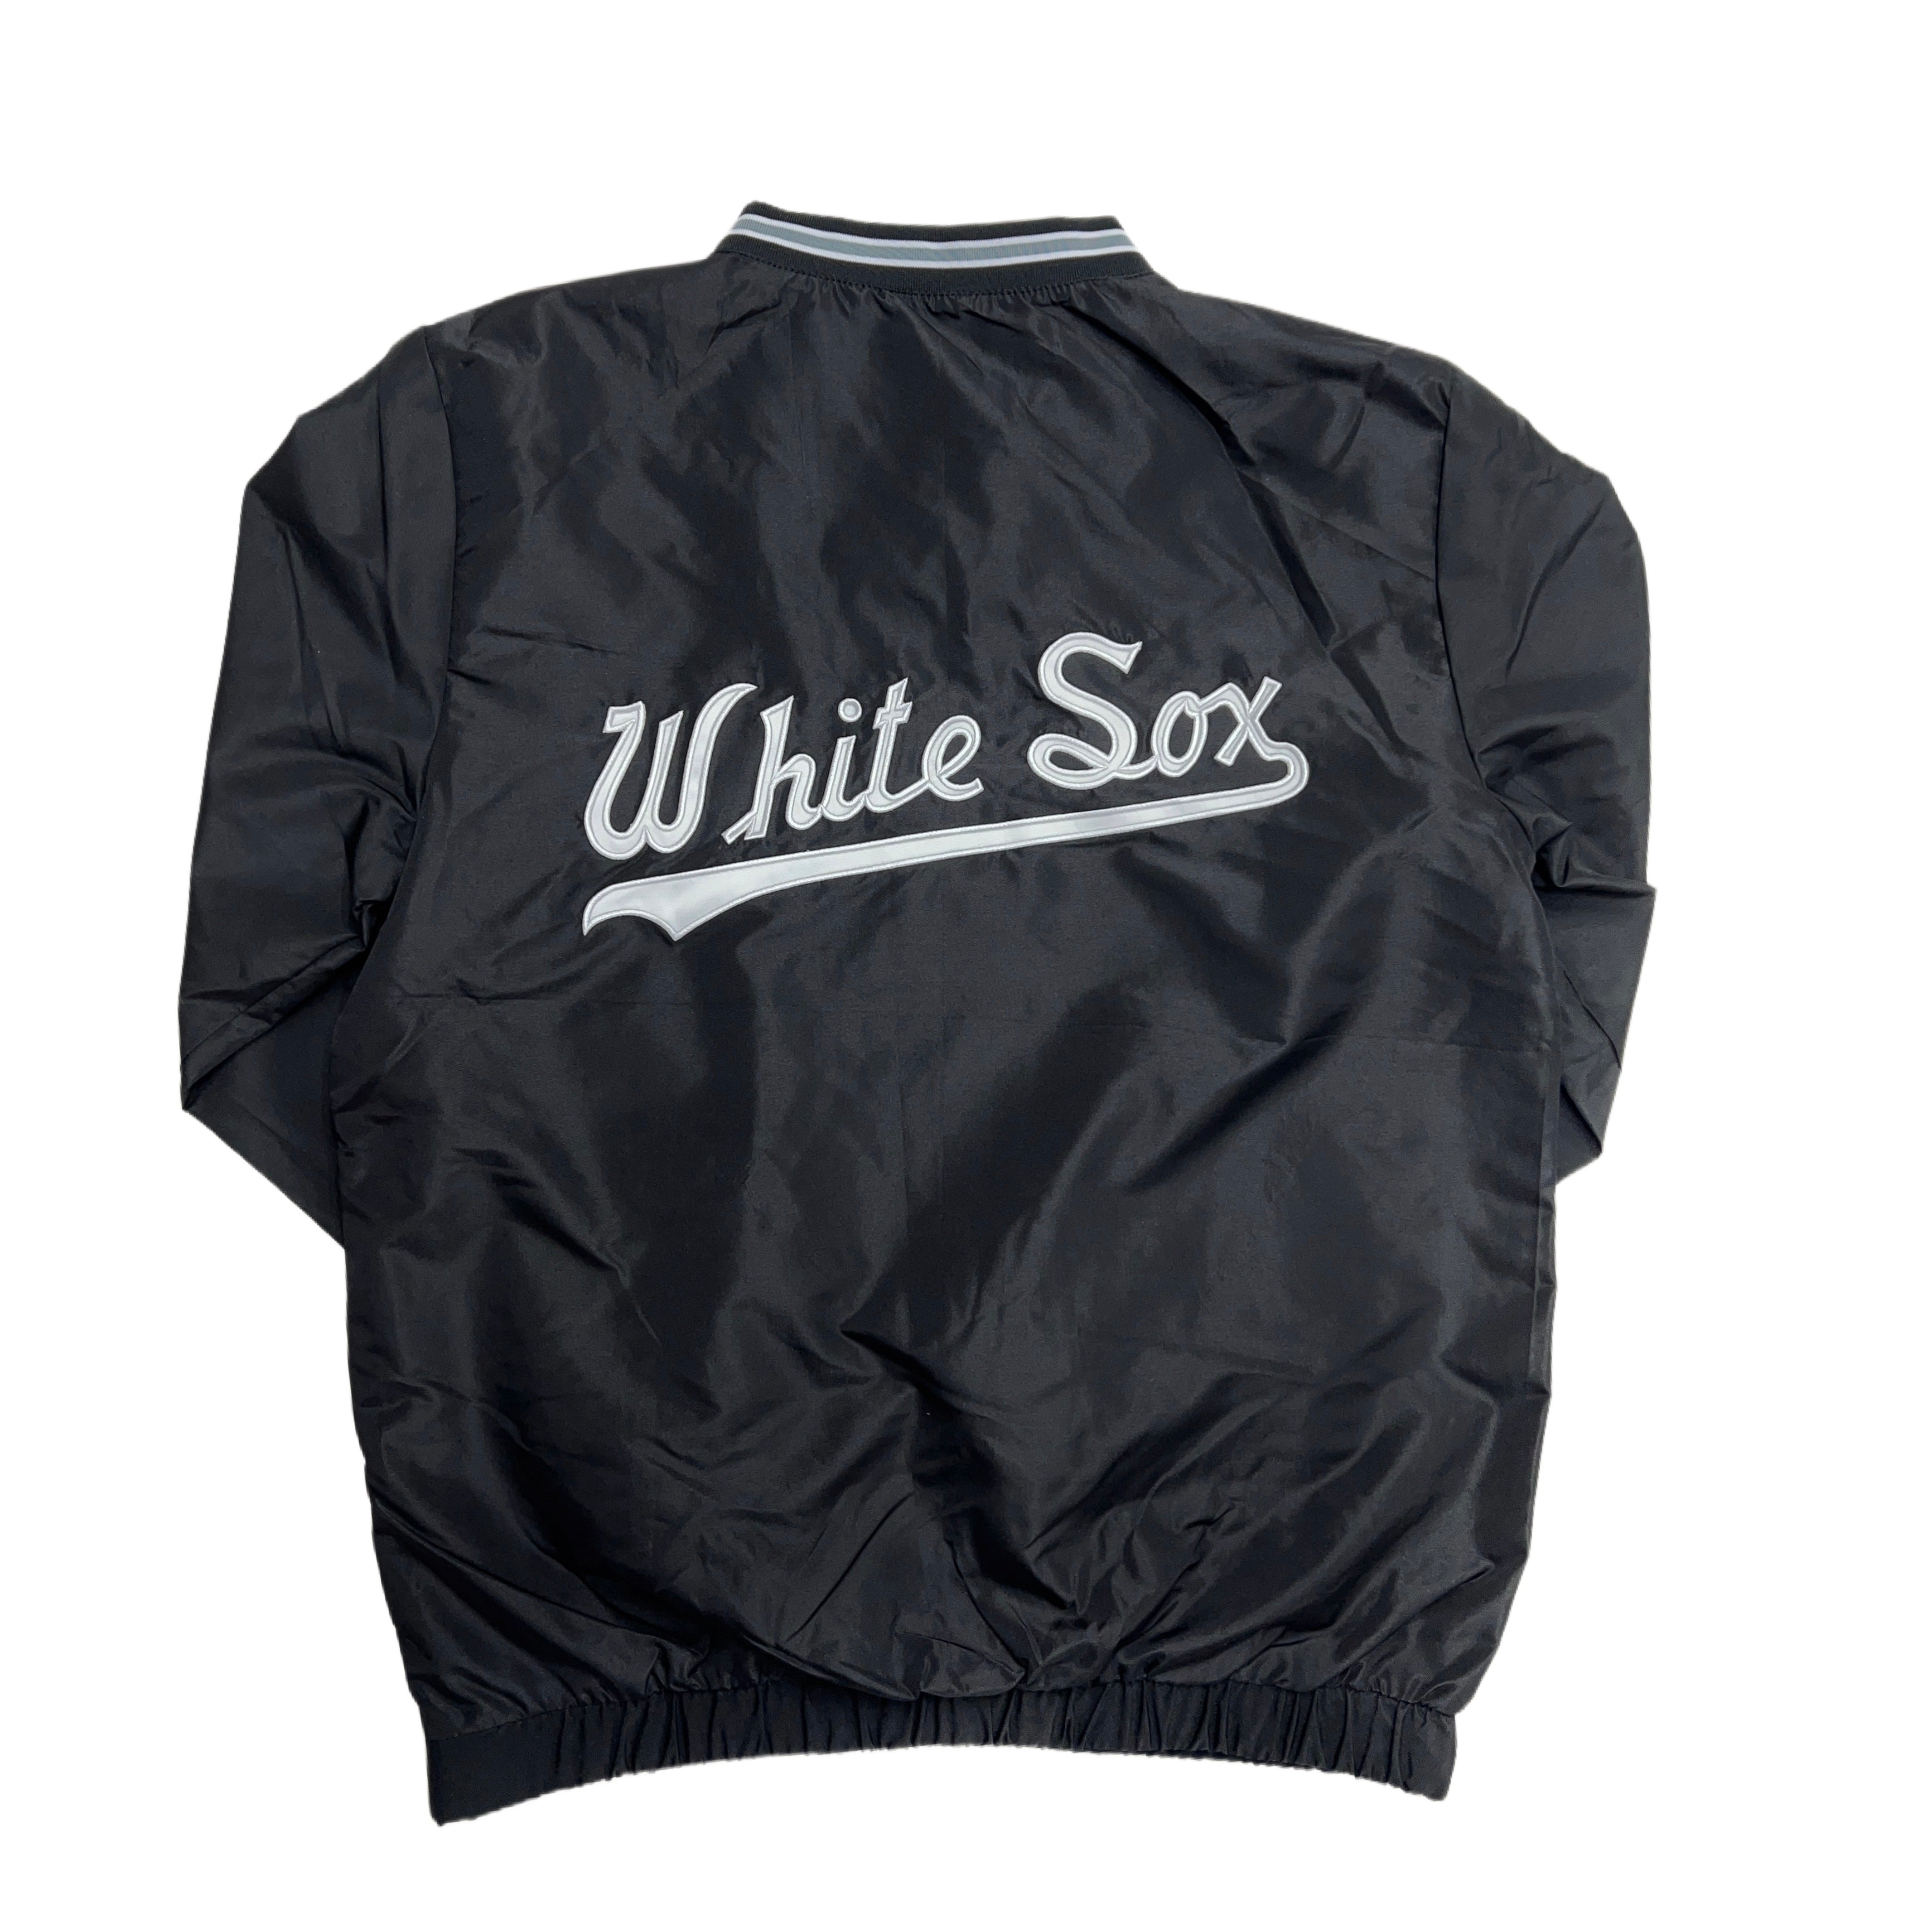 Chicago White Sox Windbreaker with Pocket